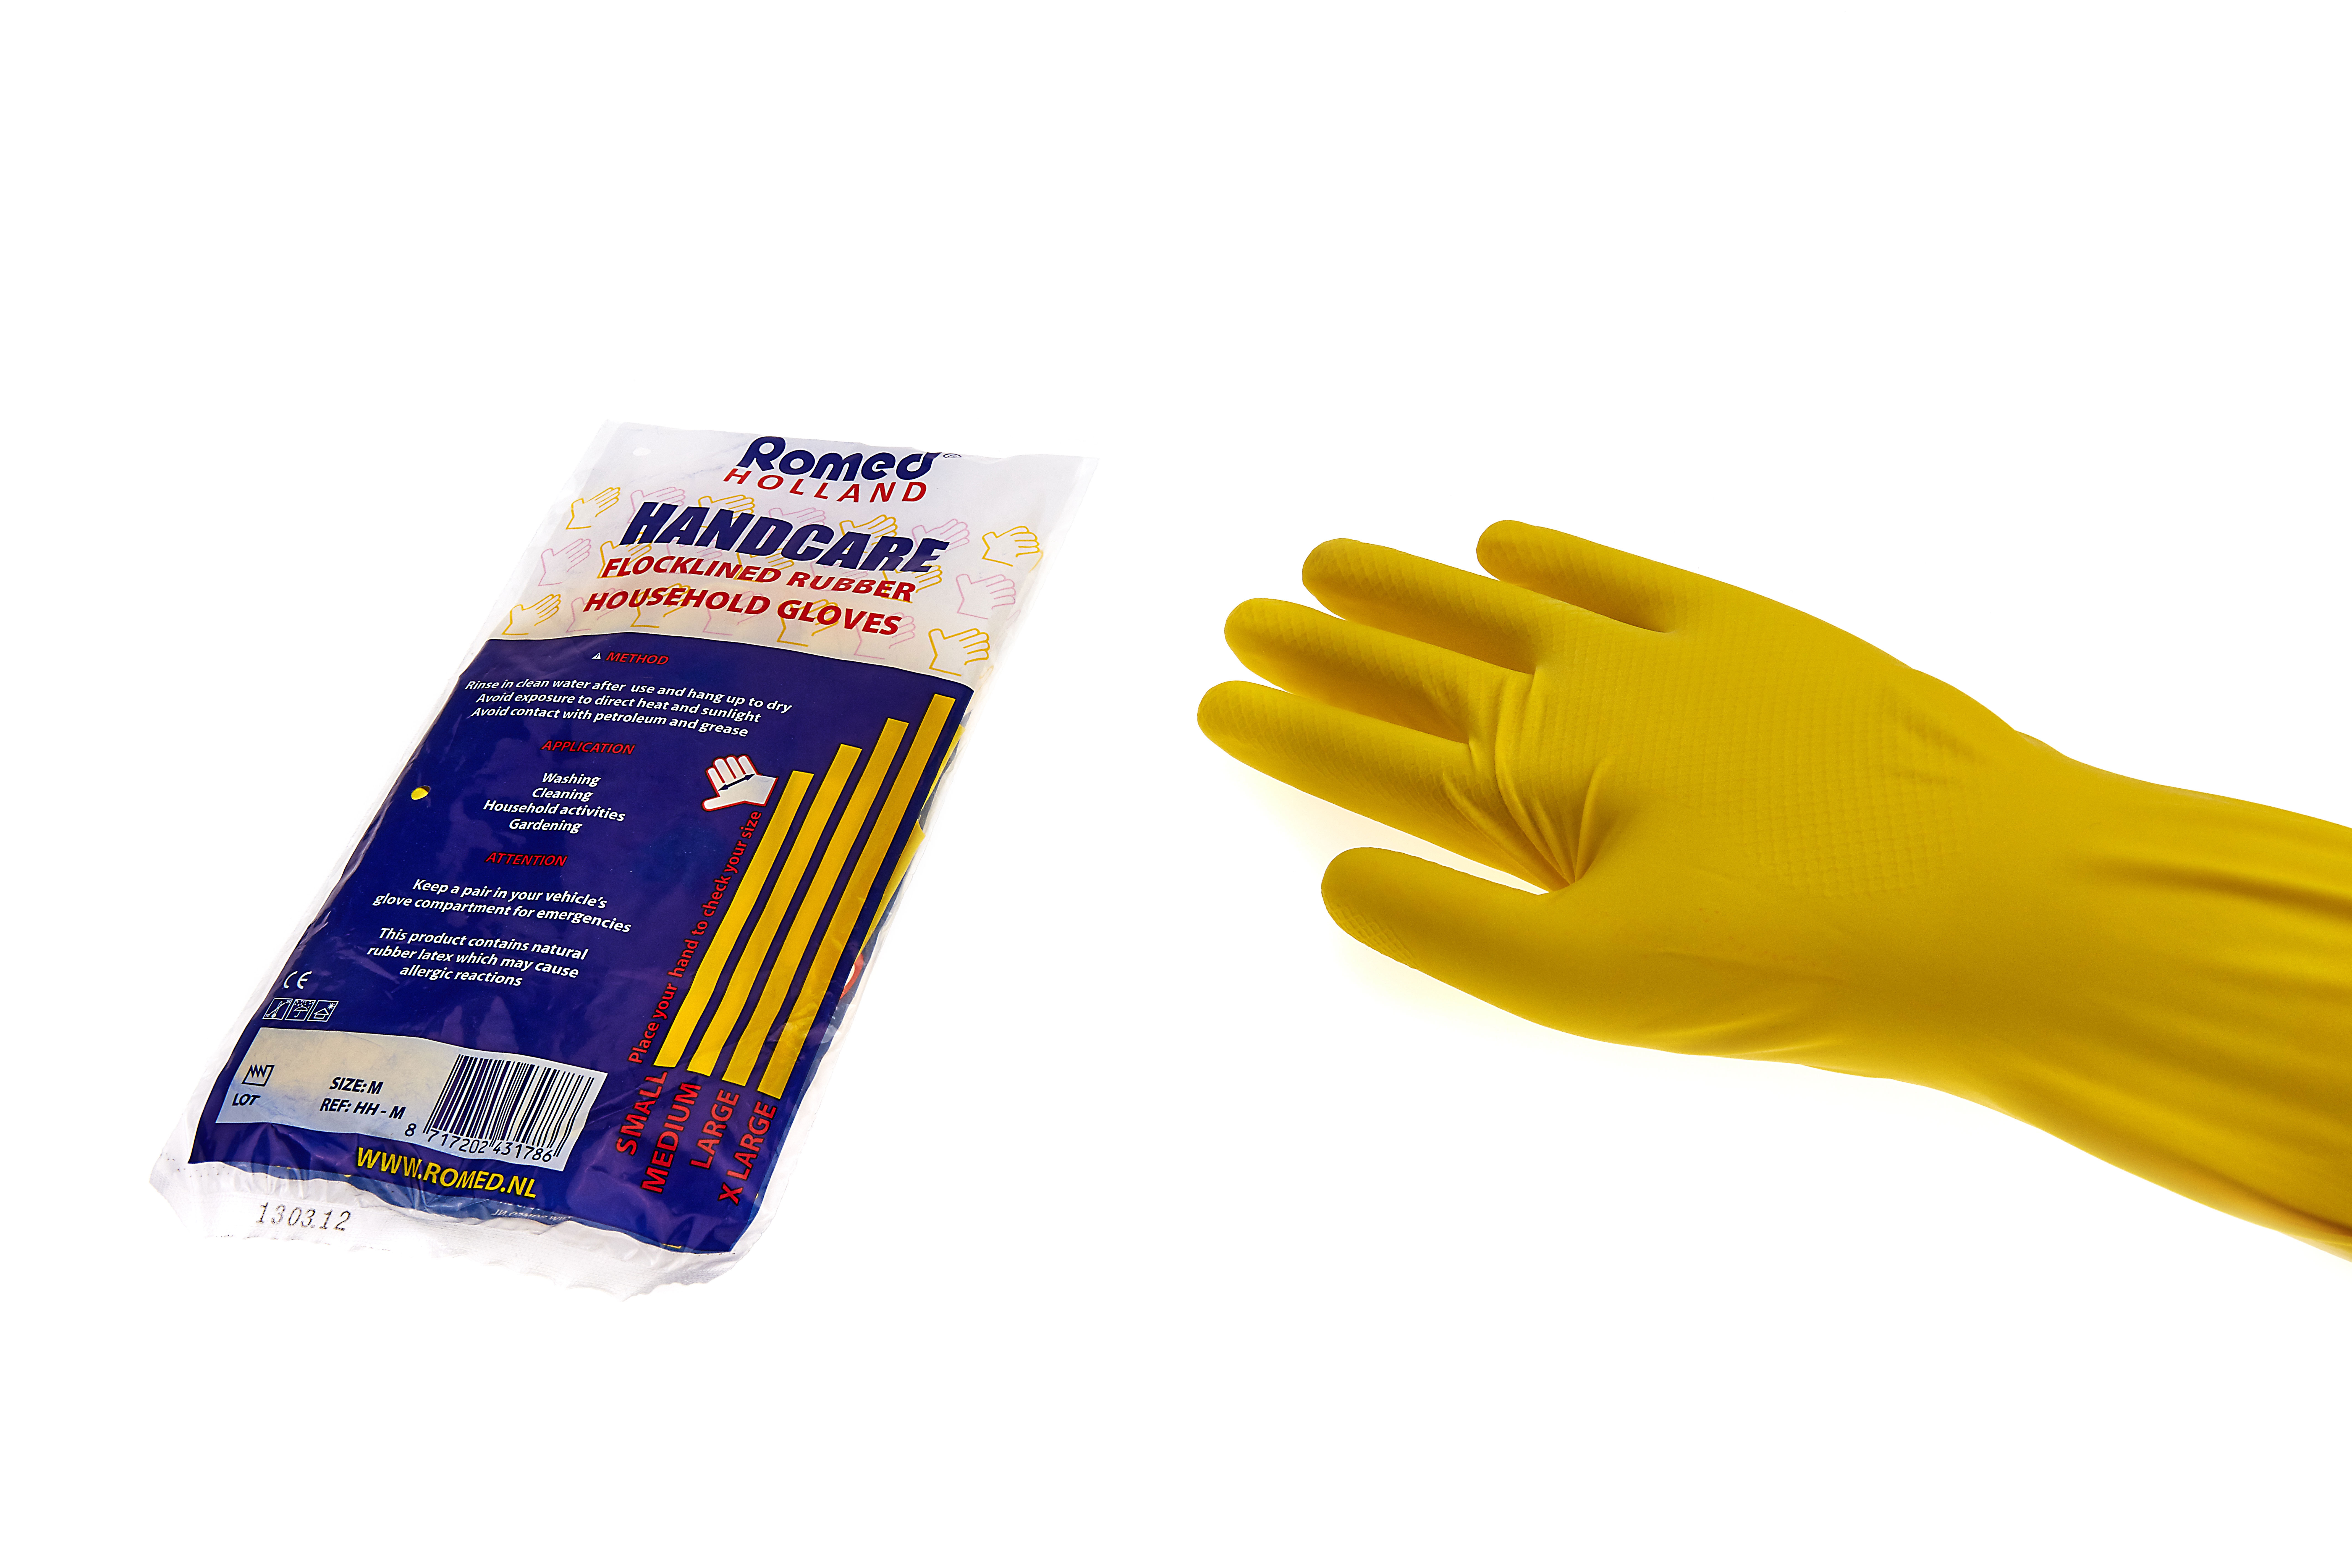 HH-M Romed household gloves, medium, per pair in a polybag, 12 polybags in a master polybag, 12 x 12 pairs = 144 pairs in a carton.